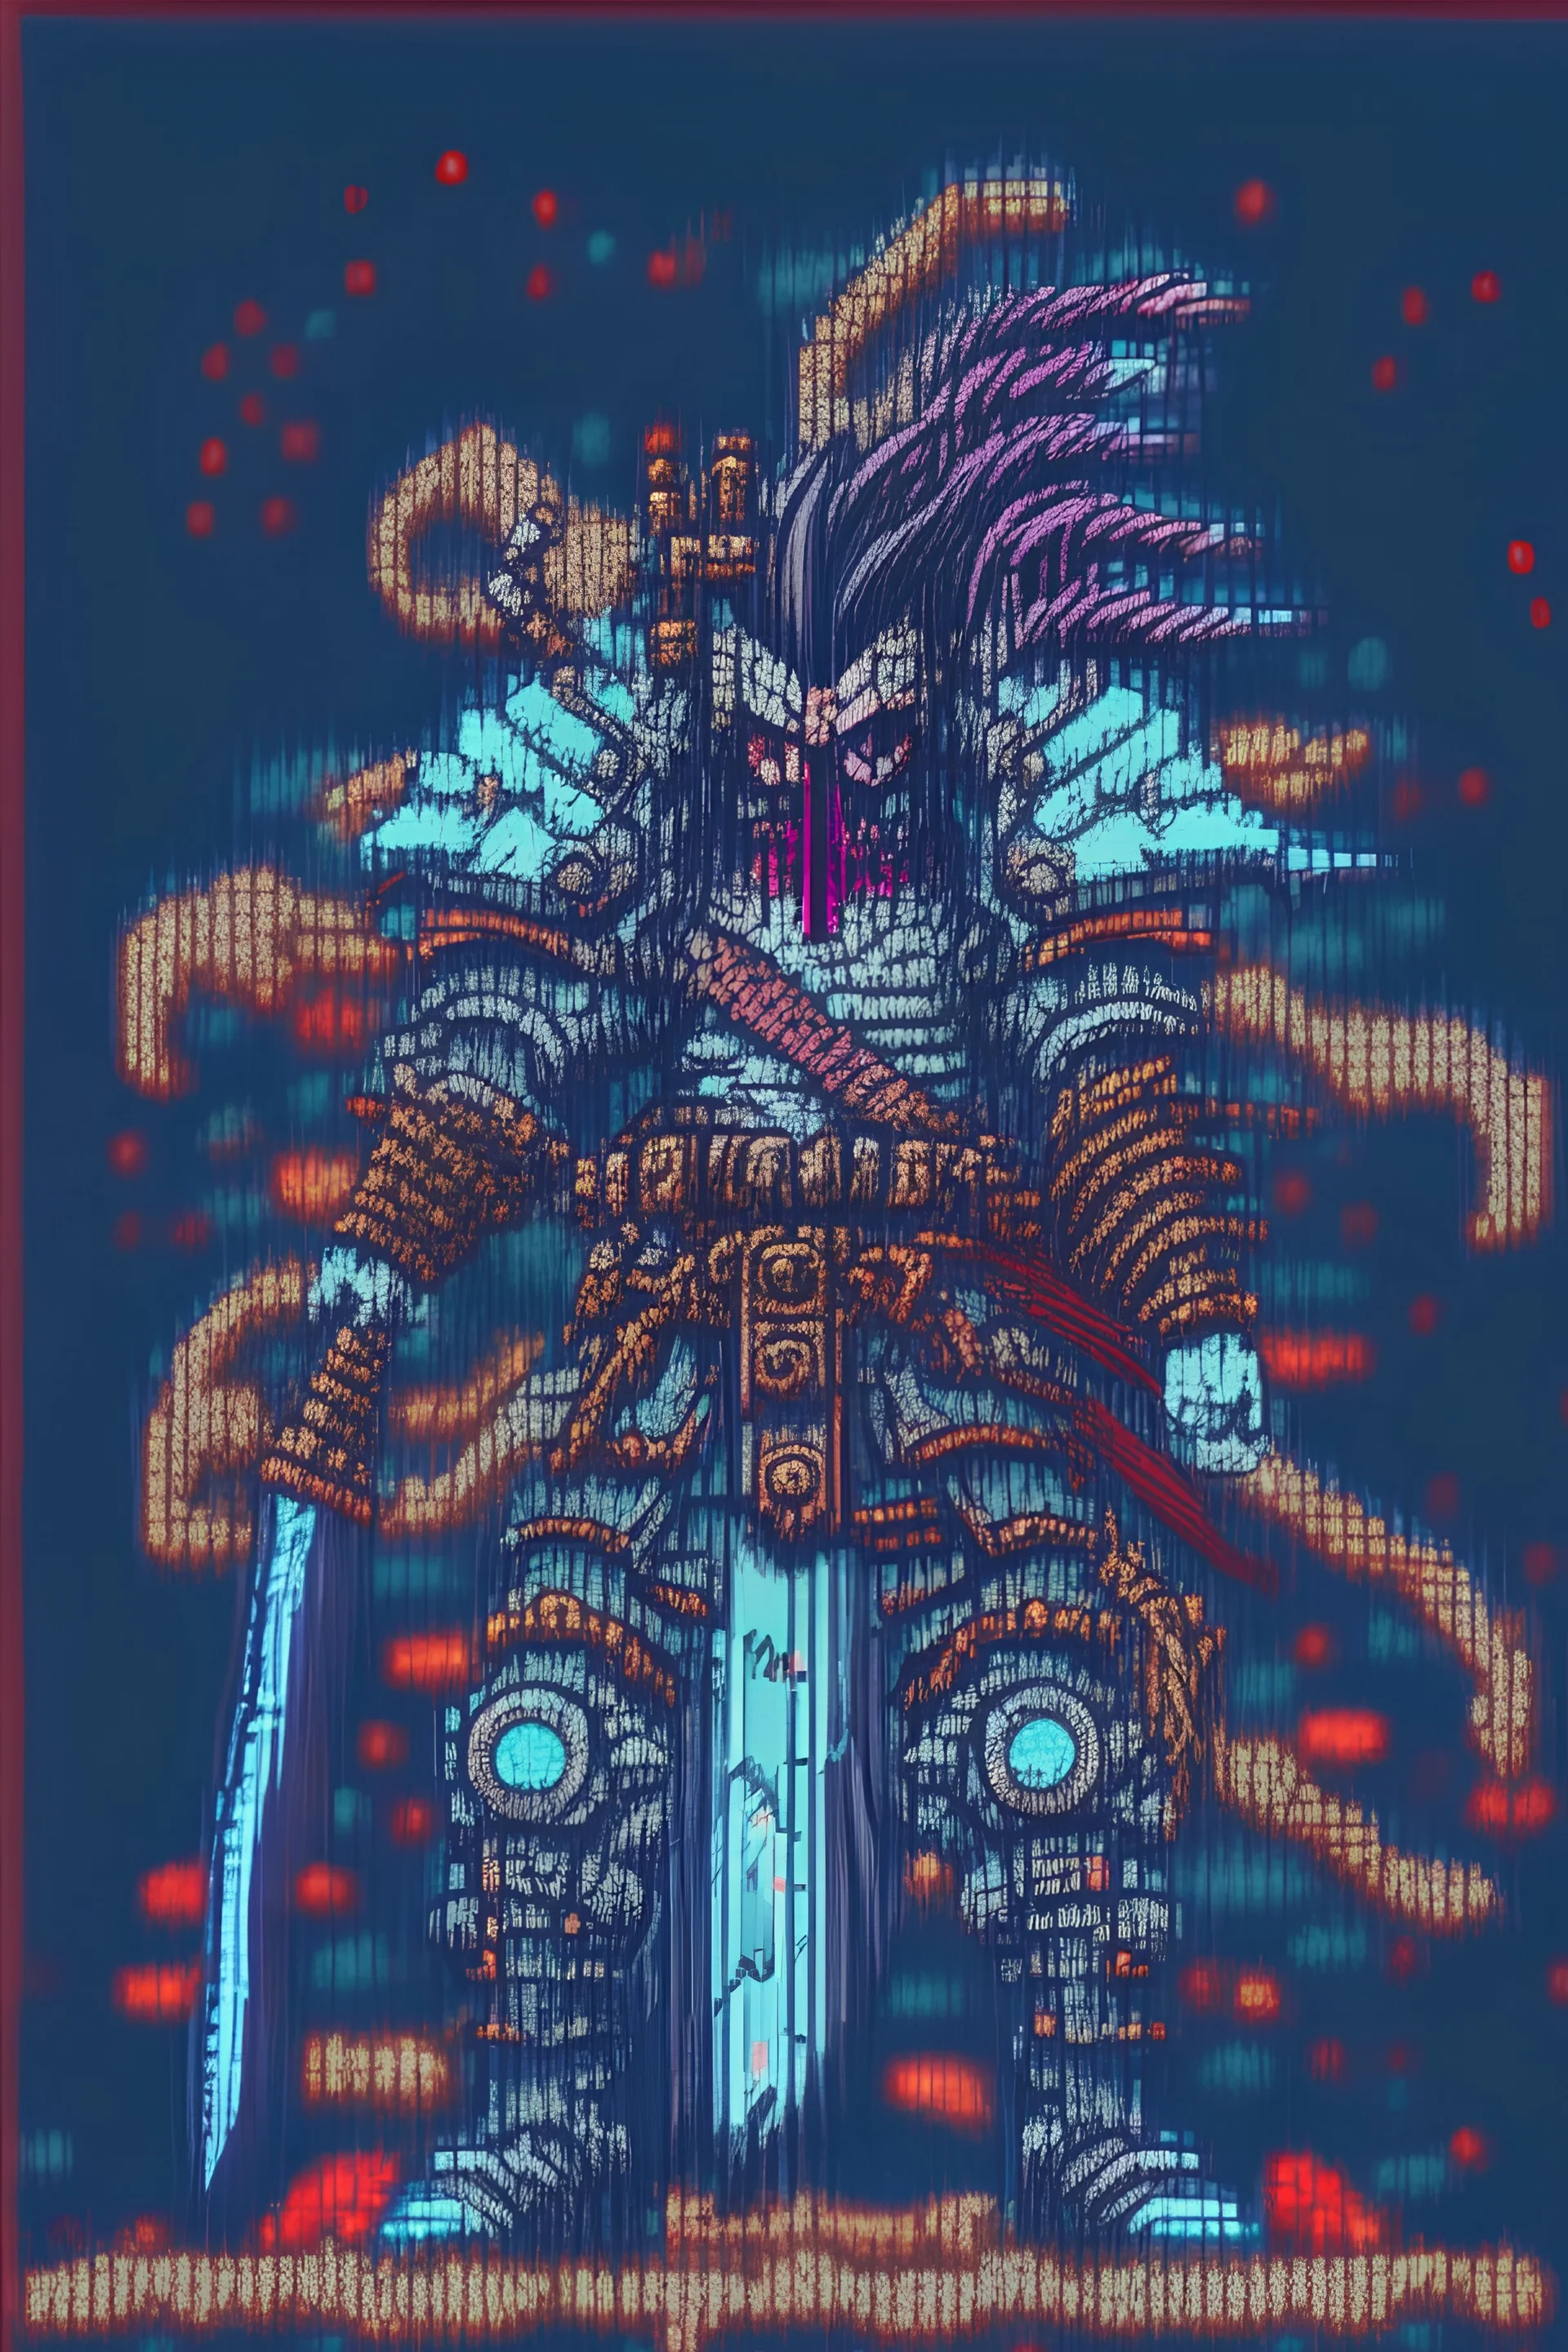 8bit pixel art,Cartoon,Japanese Manga,3,hyper realistic, gloomy,, clean lines, cyberpunk,cybernetic, zombie Vampire hunter lord,with mechanical tentacles coming out from the chest,posing as a fighting samurai, battle axe weapon,heavily ornamented symbols,ancient tribal armour pattern as long jacket in synth wave,realistic cinematic lighting, video game posecover album,death metal